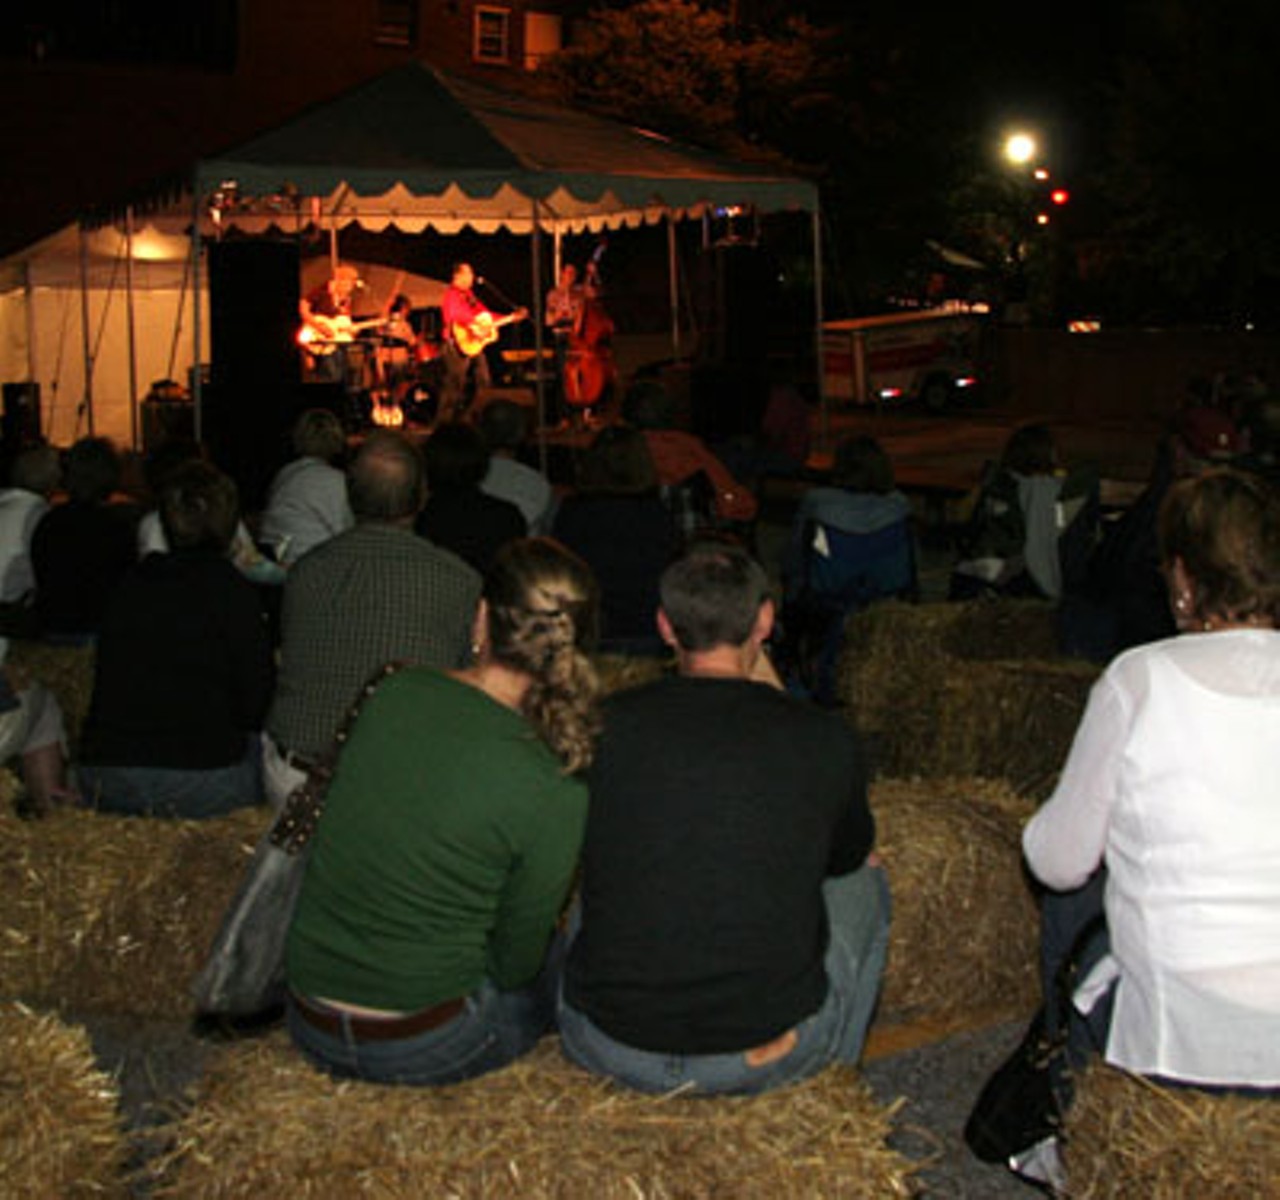 The crowd watches Scott Kay and the Continentals perform on what they said was their second-to-last show.